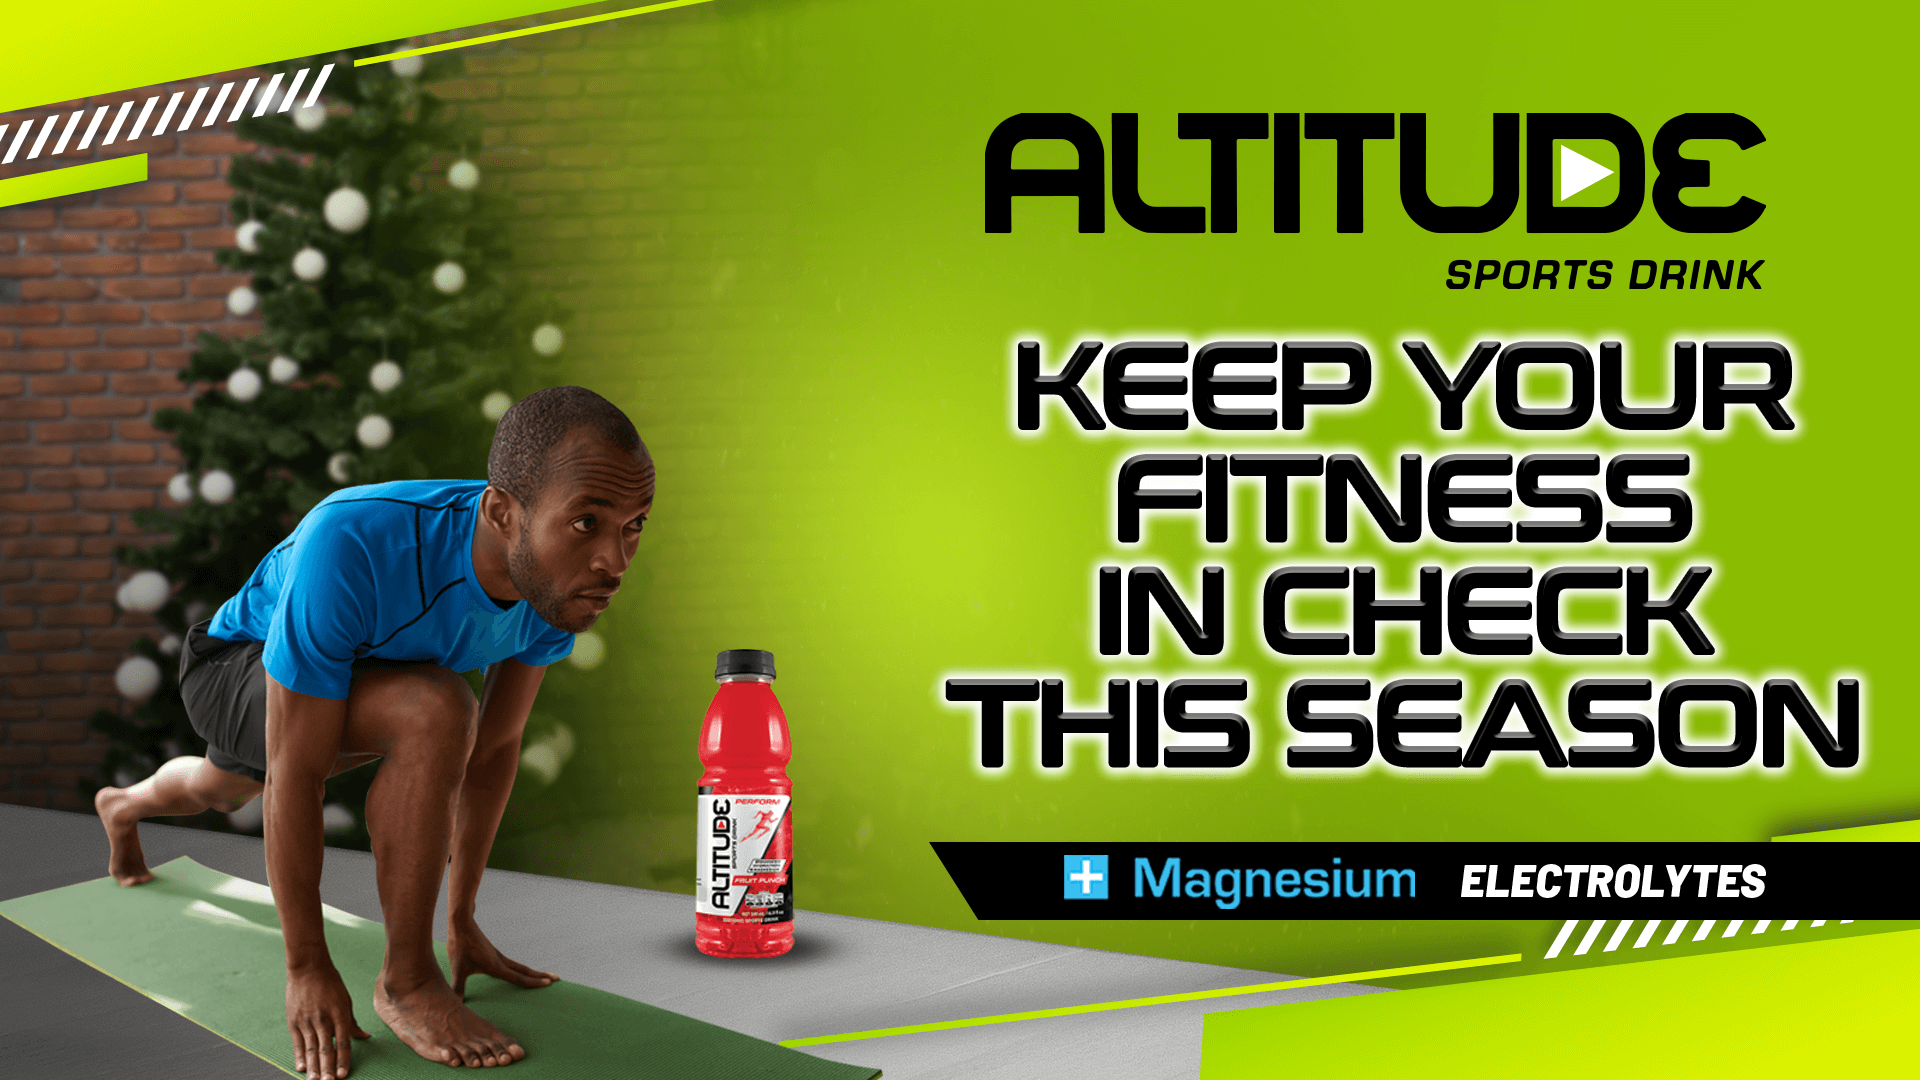 Altitude Sports Drink